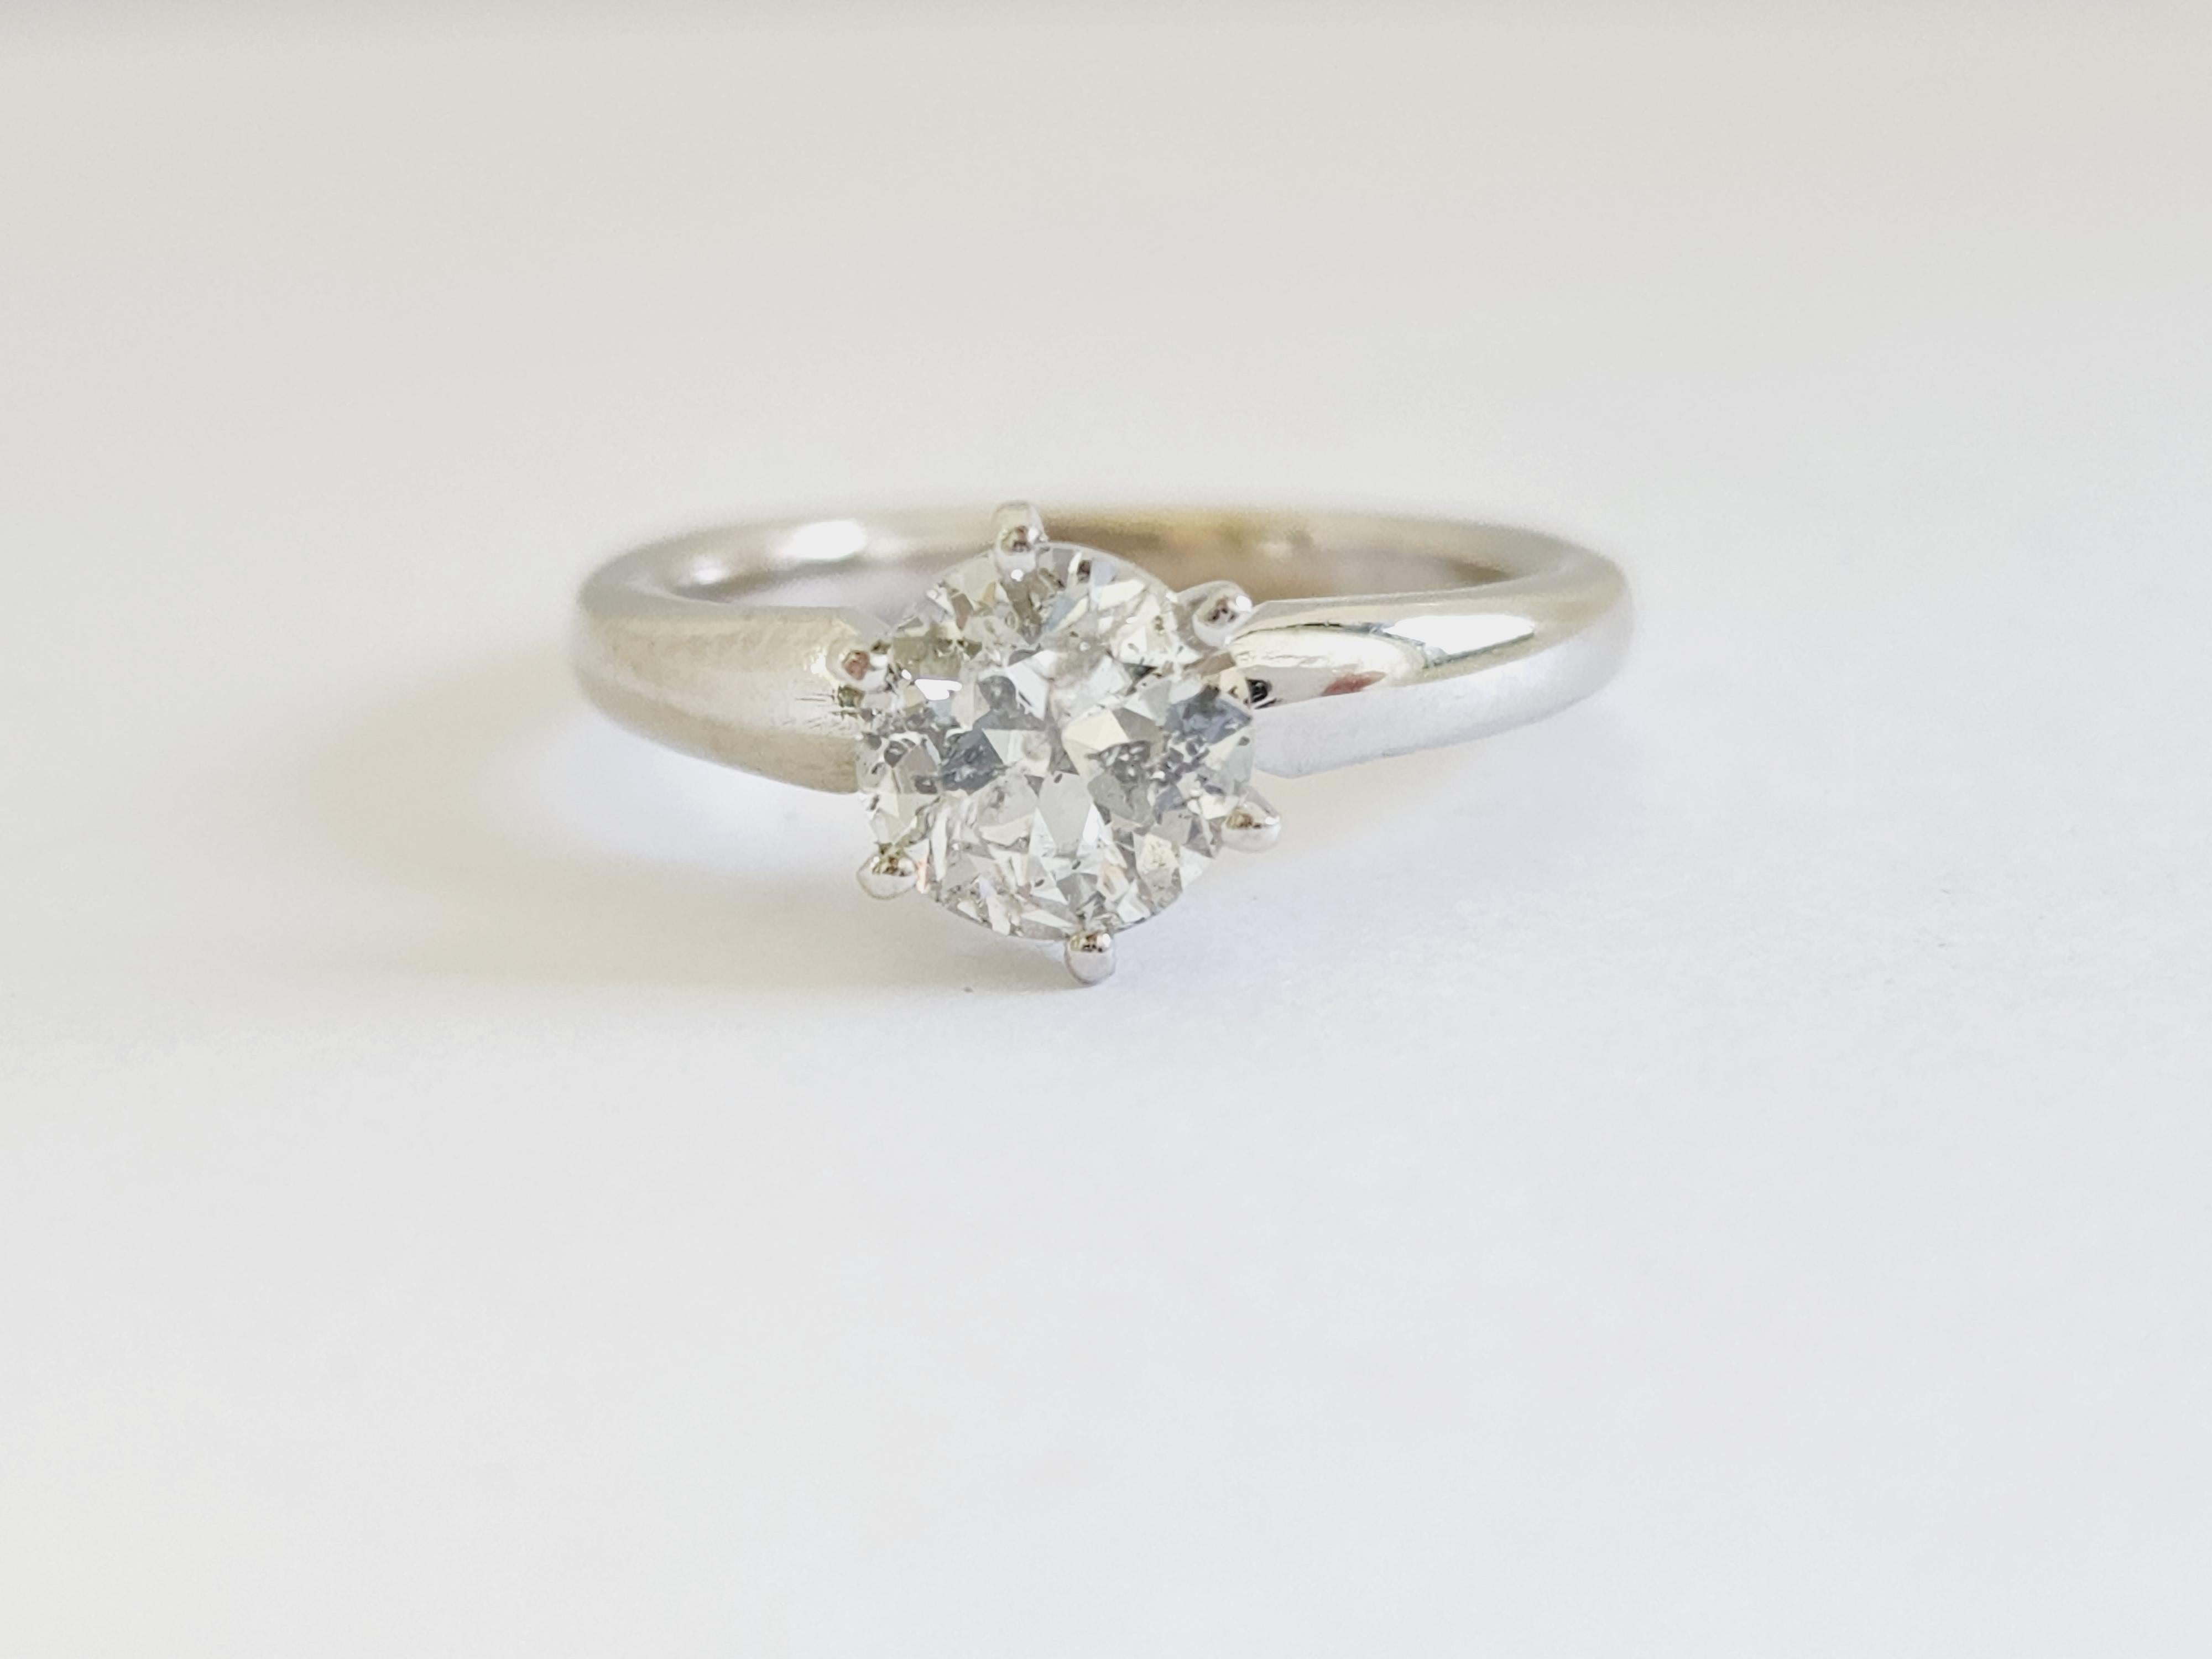 1.26 ct round brilliant cut natural diamonds. 6 prong solitaire setting, set in 14k white gold. Ring Size 6.5.